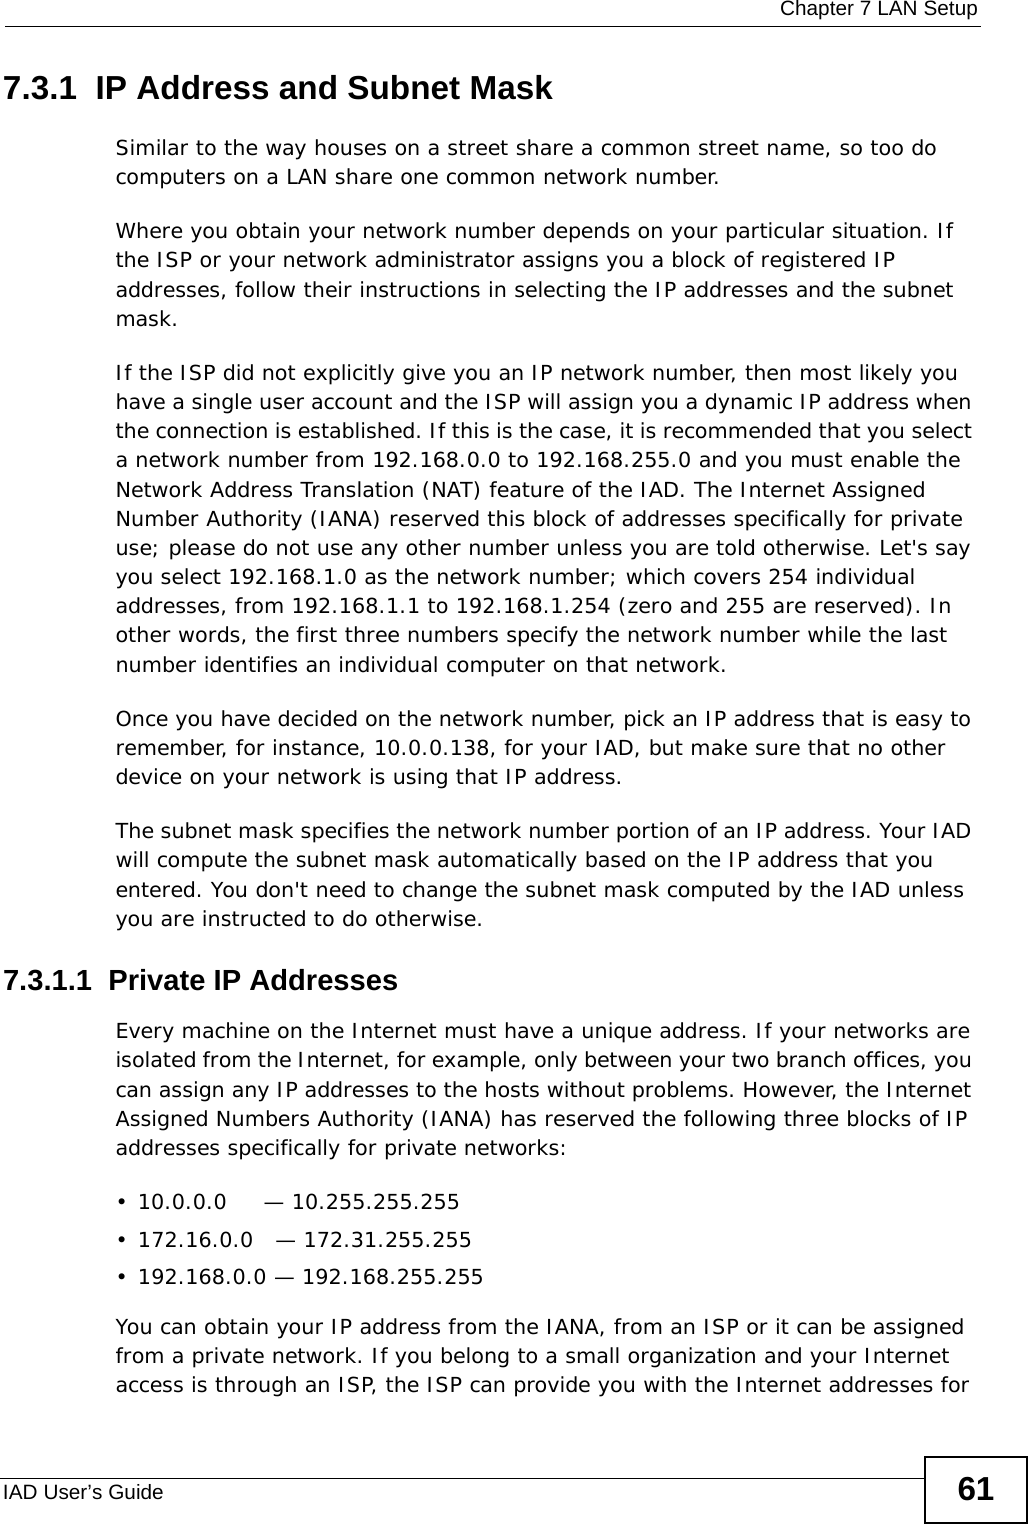  Chapter 7 LAN SetupIAD User’s Guide 617.3.1  IP Address and Subnet MaskSimilar to the way houses on a street share a common street name, so too do computers on a LAN share one common network number.Where you obtain your network number depends on your particular situation. If the ISP or your network administrator assigns you a block of registered IP addresses, follow their instructions in selecting the IP addresses and the subnet mask.If the ISP did not explicitly give you an IP network number, then most likely you have a single user account and the ISP will assign you a dynamic IP address when the connection is established. If this is the case, it is recommended that you select a network number from 192.168.0.0 to 192.168.255.0 and you must enable the Network Address Translation (NAT) feature of the IAD. The Internet Assigned Number Authority (IANA) reserved this block of addresses specifically for private use; please do not use any other number unless you are told otherwise. Let&apos;s say you select 192.168.1.0 as the network number; which covers 254 individual addresses, from 192.168.1.1 to 192.168.1.254 (zero and 255 are reserved). In other words, the first three numbers specify the network number while the last number identifies an individual computer on that network.Once you have decided on the network number, pick an IP address that is easy to remember, for instance, 10.0.0.138, for your IAD, but make sure that no other device on your network is using that IP address.The subnet mask specifies the network number portion of an IP address. Your IAD will compute the subnet mask automatically based on the IP address that you entered. You don&apos;t need to change the subnet mask computed by the IAD unless you are instructed to do otherwise.7.3.1.1  Private IP AddressesEvery machine on the Internet must have a unique address. If your networks are isolated from the Internet, for example, only between your two branch offices, you can assign any IP addresses to the hosts without problems. However, the Internet Assigned Numbers Authority (IANA) has reserved the following three blocks of IP addresses specifically for private networks:• 10.0.0.0     — 10.255.255.255• 172.16.0.0   — 172.31.255.255• 192.168.0.0 — 192.168.255.255You can obtain your IP address from the IANA, from an ISP or it can be assigned from a private network. If you belong to a small organization and your Internet access is through an ISP, the ISP can provide you with the Internet addresses for 